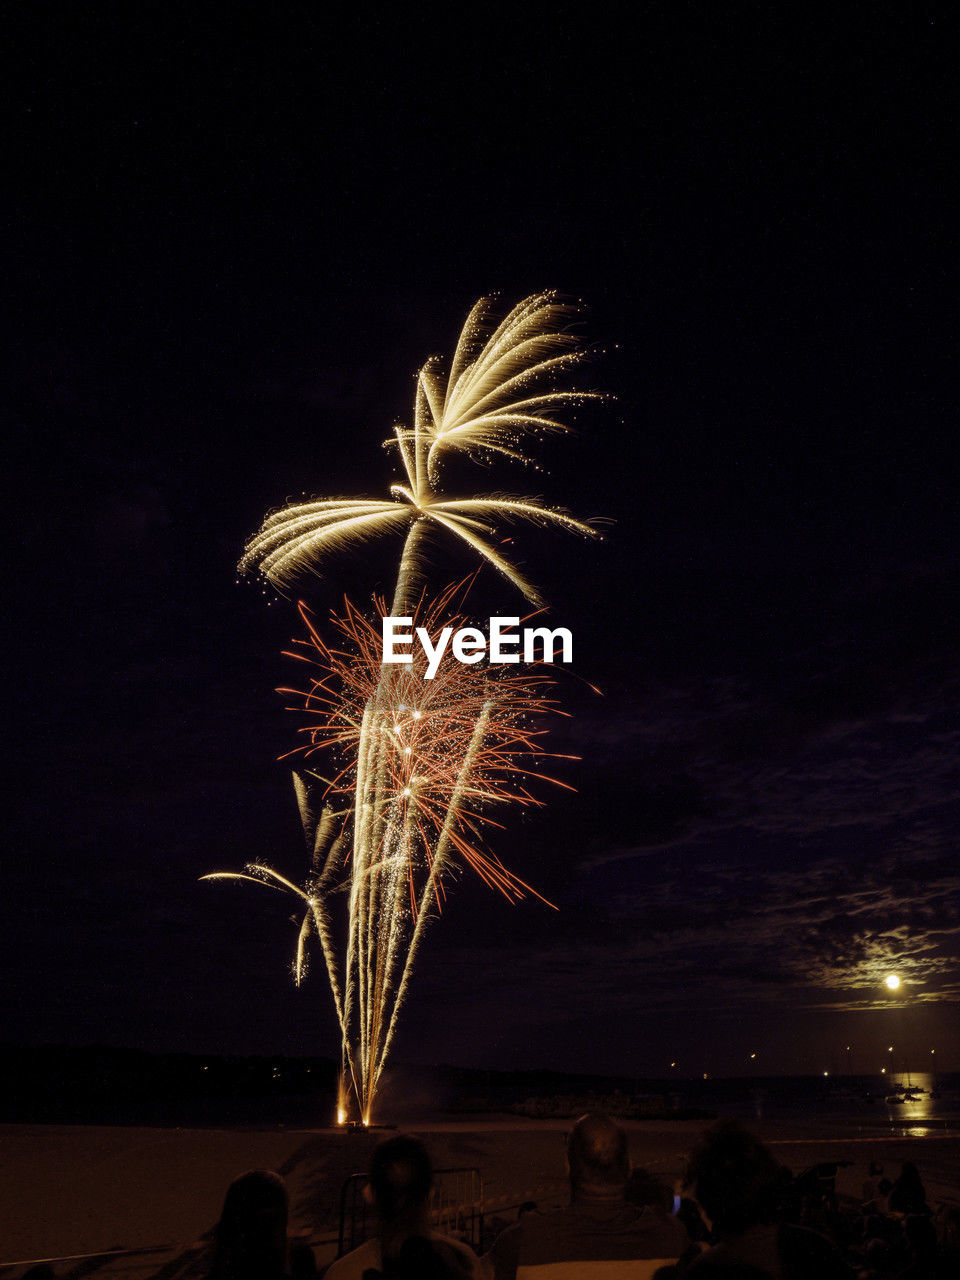 fireworks, night, illuminated, celebration, firework display, event, motion, arts culture and entertainment, exploding, sky, nature, firework - man made object, long exposure, group of people, recreation, glowing, new year's eve, outdoors, sparkler, water, blurred motion, darkness, men